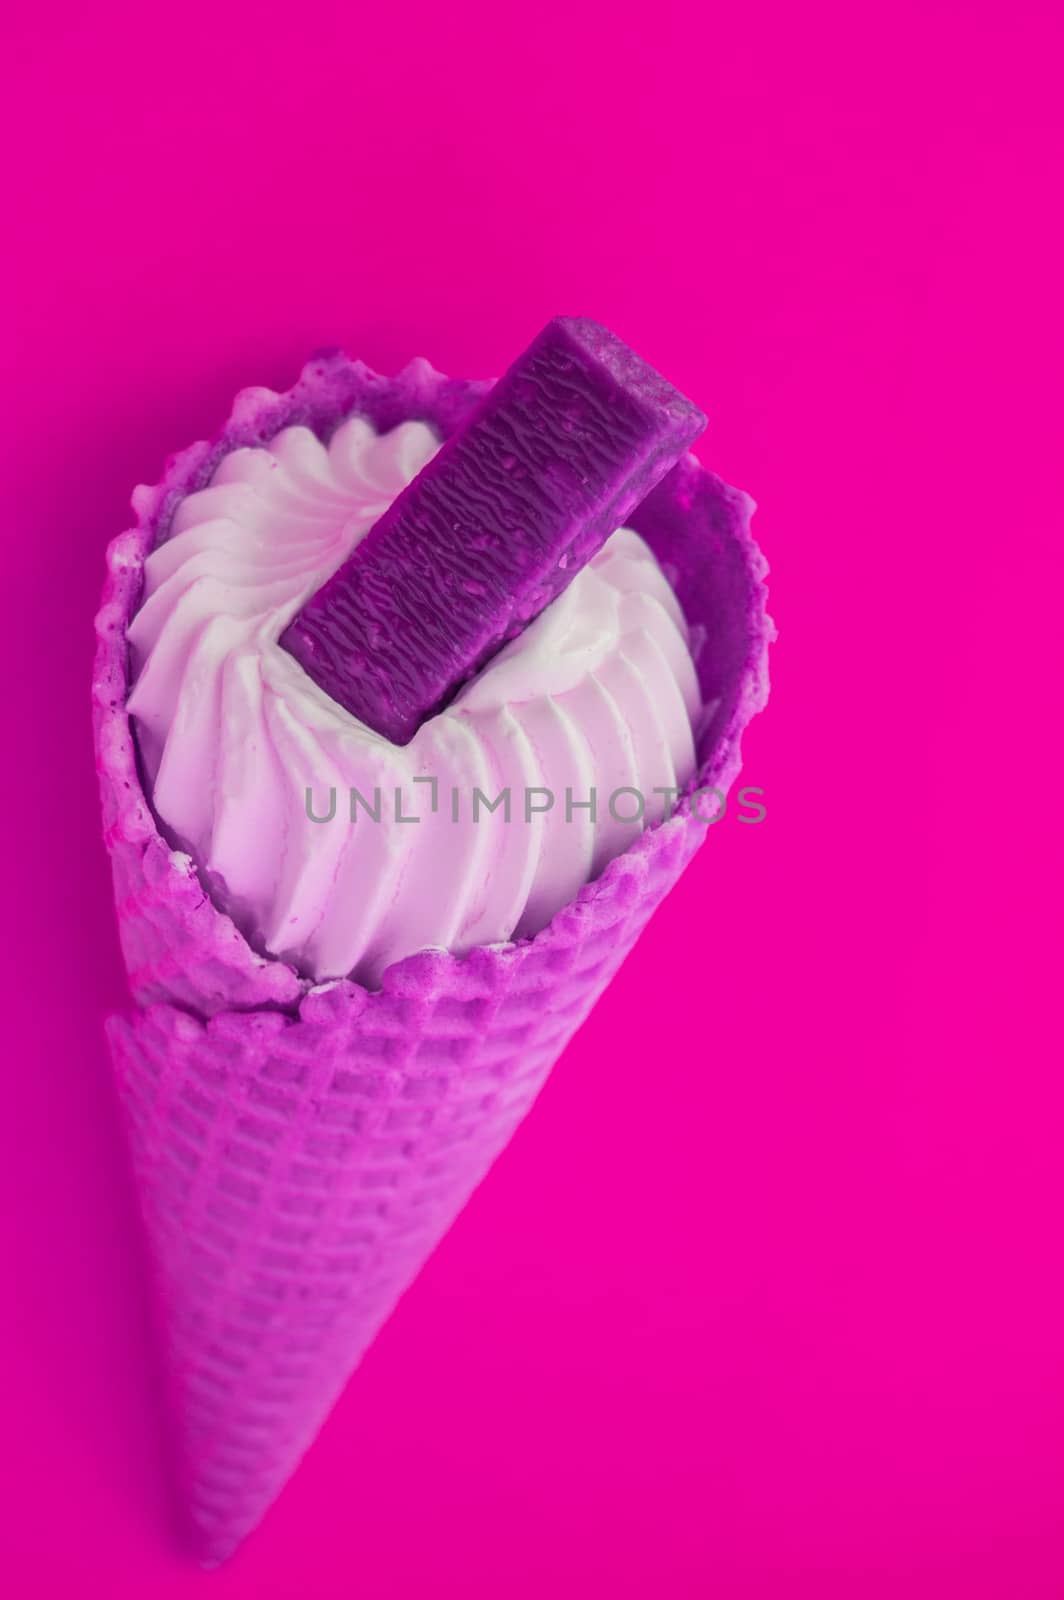 Ice cream CONE NEON COLORS pop art Flatley art, hot pink background by claire_lucia